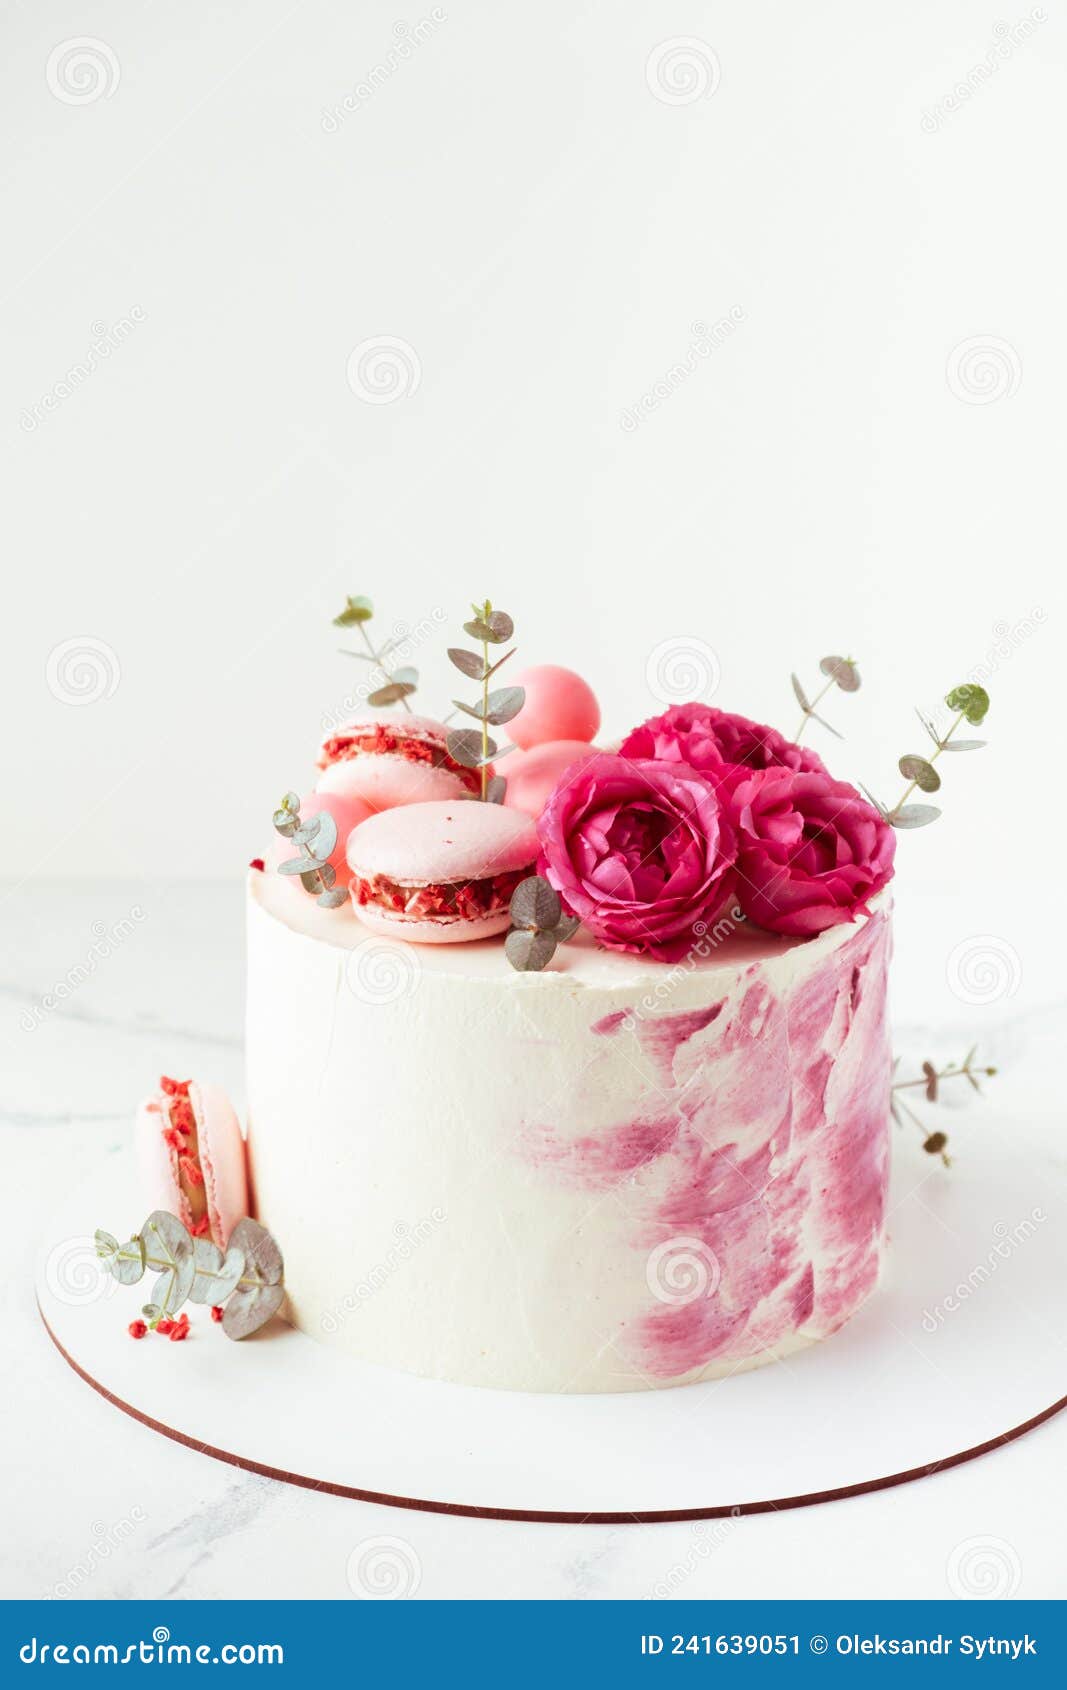 Beautiful Birthday Cake with Pink Cream Cheese Frosting Decorated with Macaroons and Roses. Happy Valentine`s Day Stock Image - Image of ceremony, elegant: 241639051